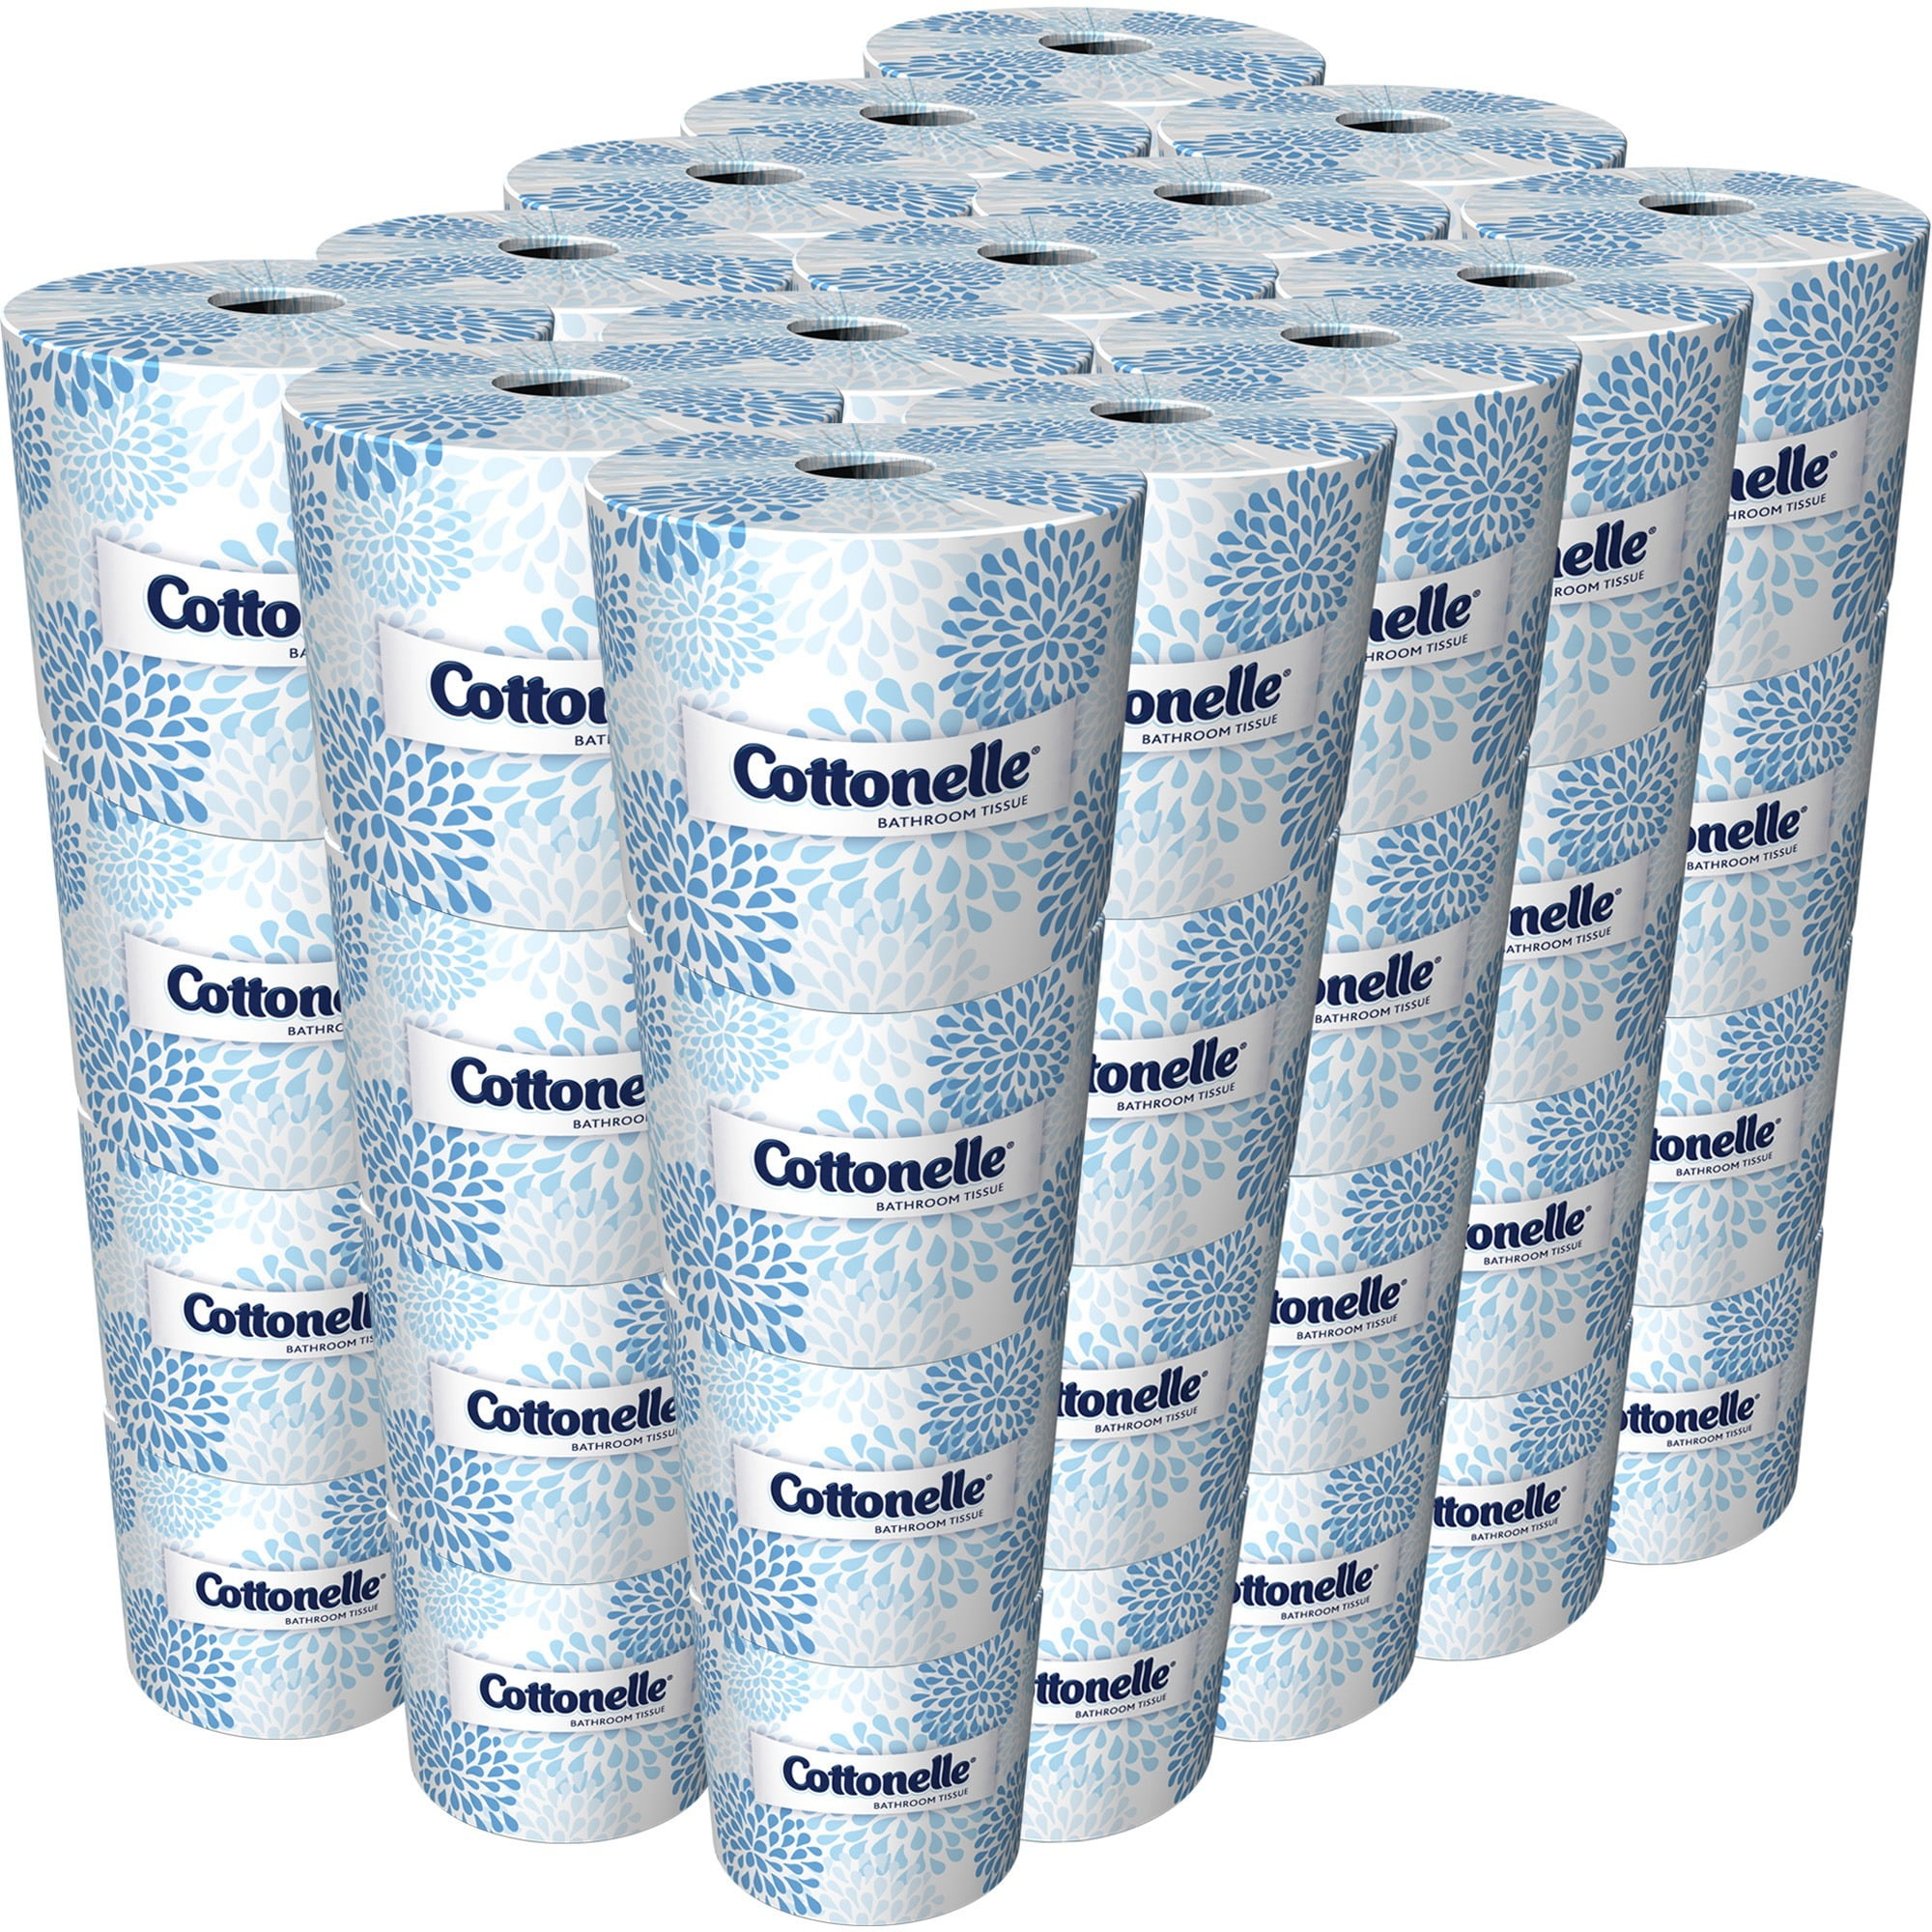 White Cottonelle Professional  Bulk Toilet Paper for Business 17713 2-PLY 451 Sheets / Roll Standard Toilet Paper Rolls 60 Rolls / Case 